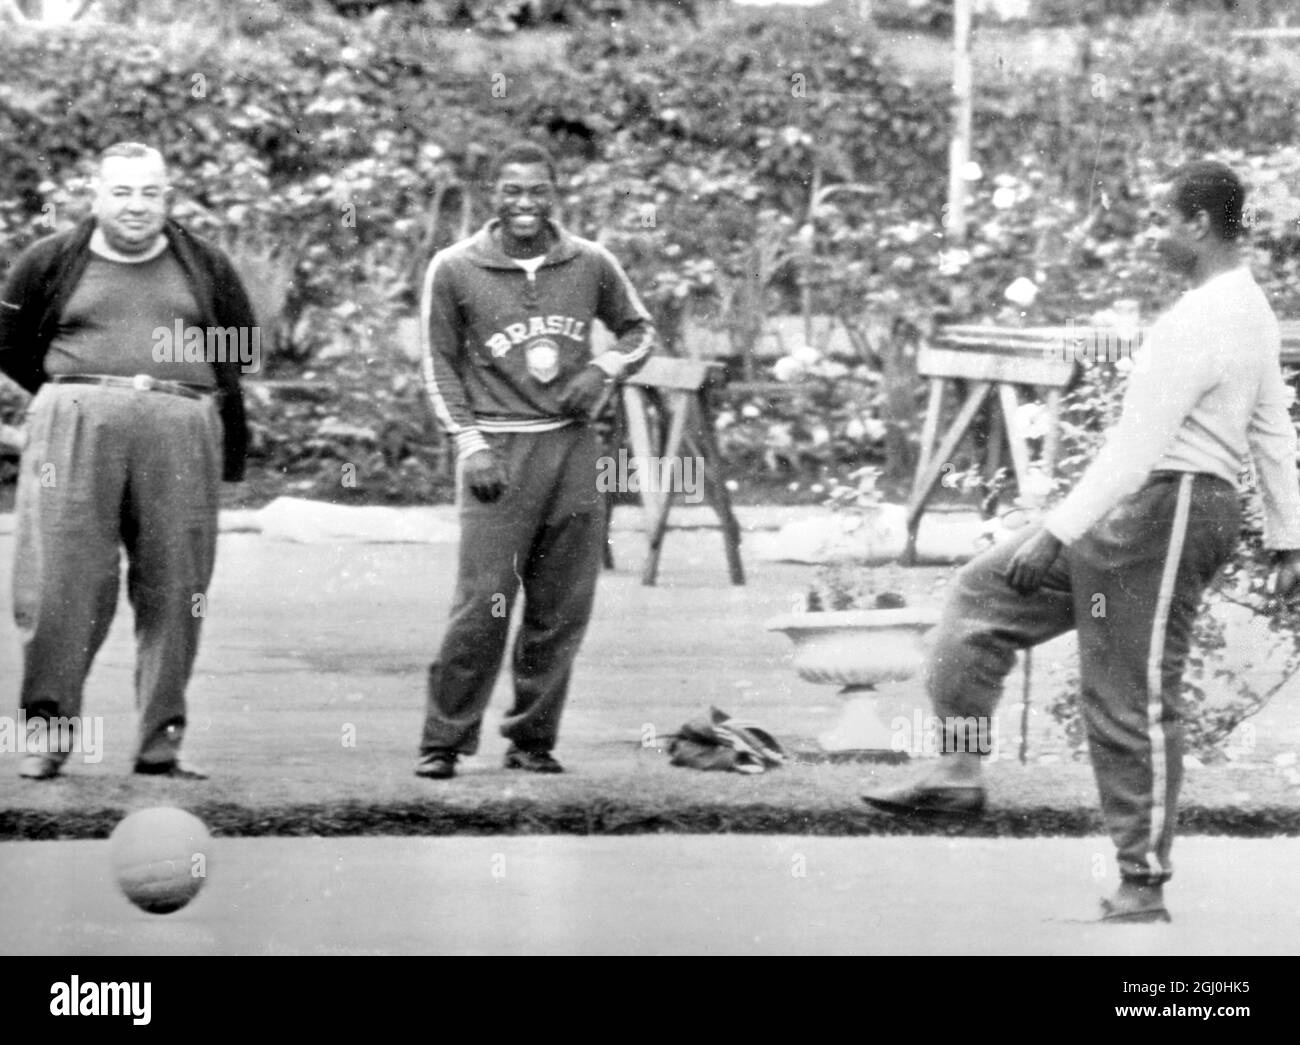 Vincente Feola (left), manager of the 1966 Brazilian World Cup Football team, watches as two of his players, Fidelis (centre), and Lima have a workout on the bowling green of the team's hotel at Lymm, Cheshire in England. 11th July 1966. Stock Photo